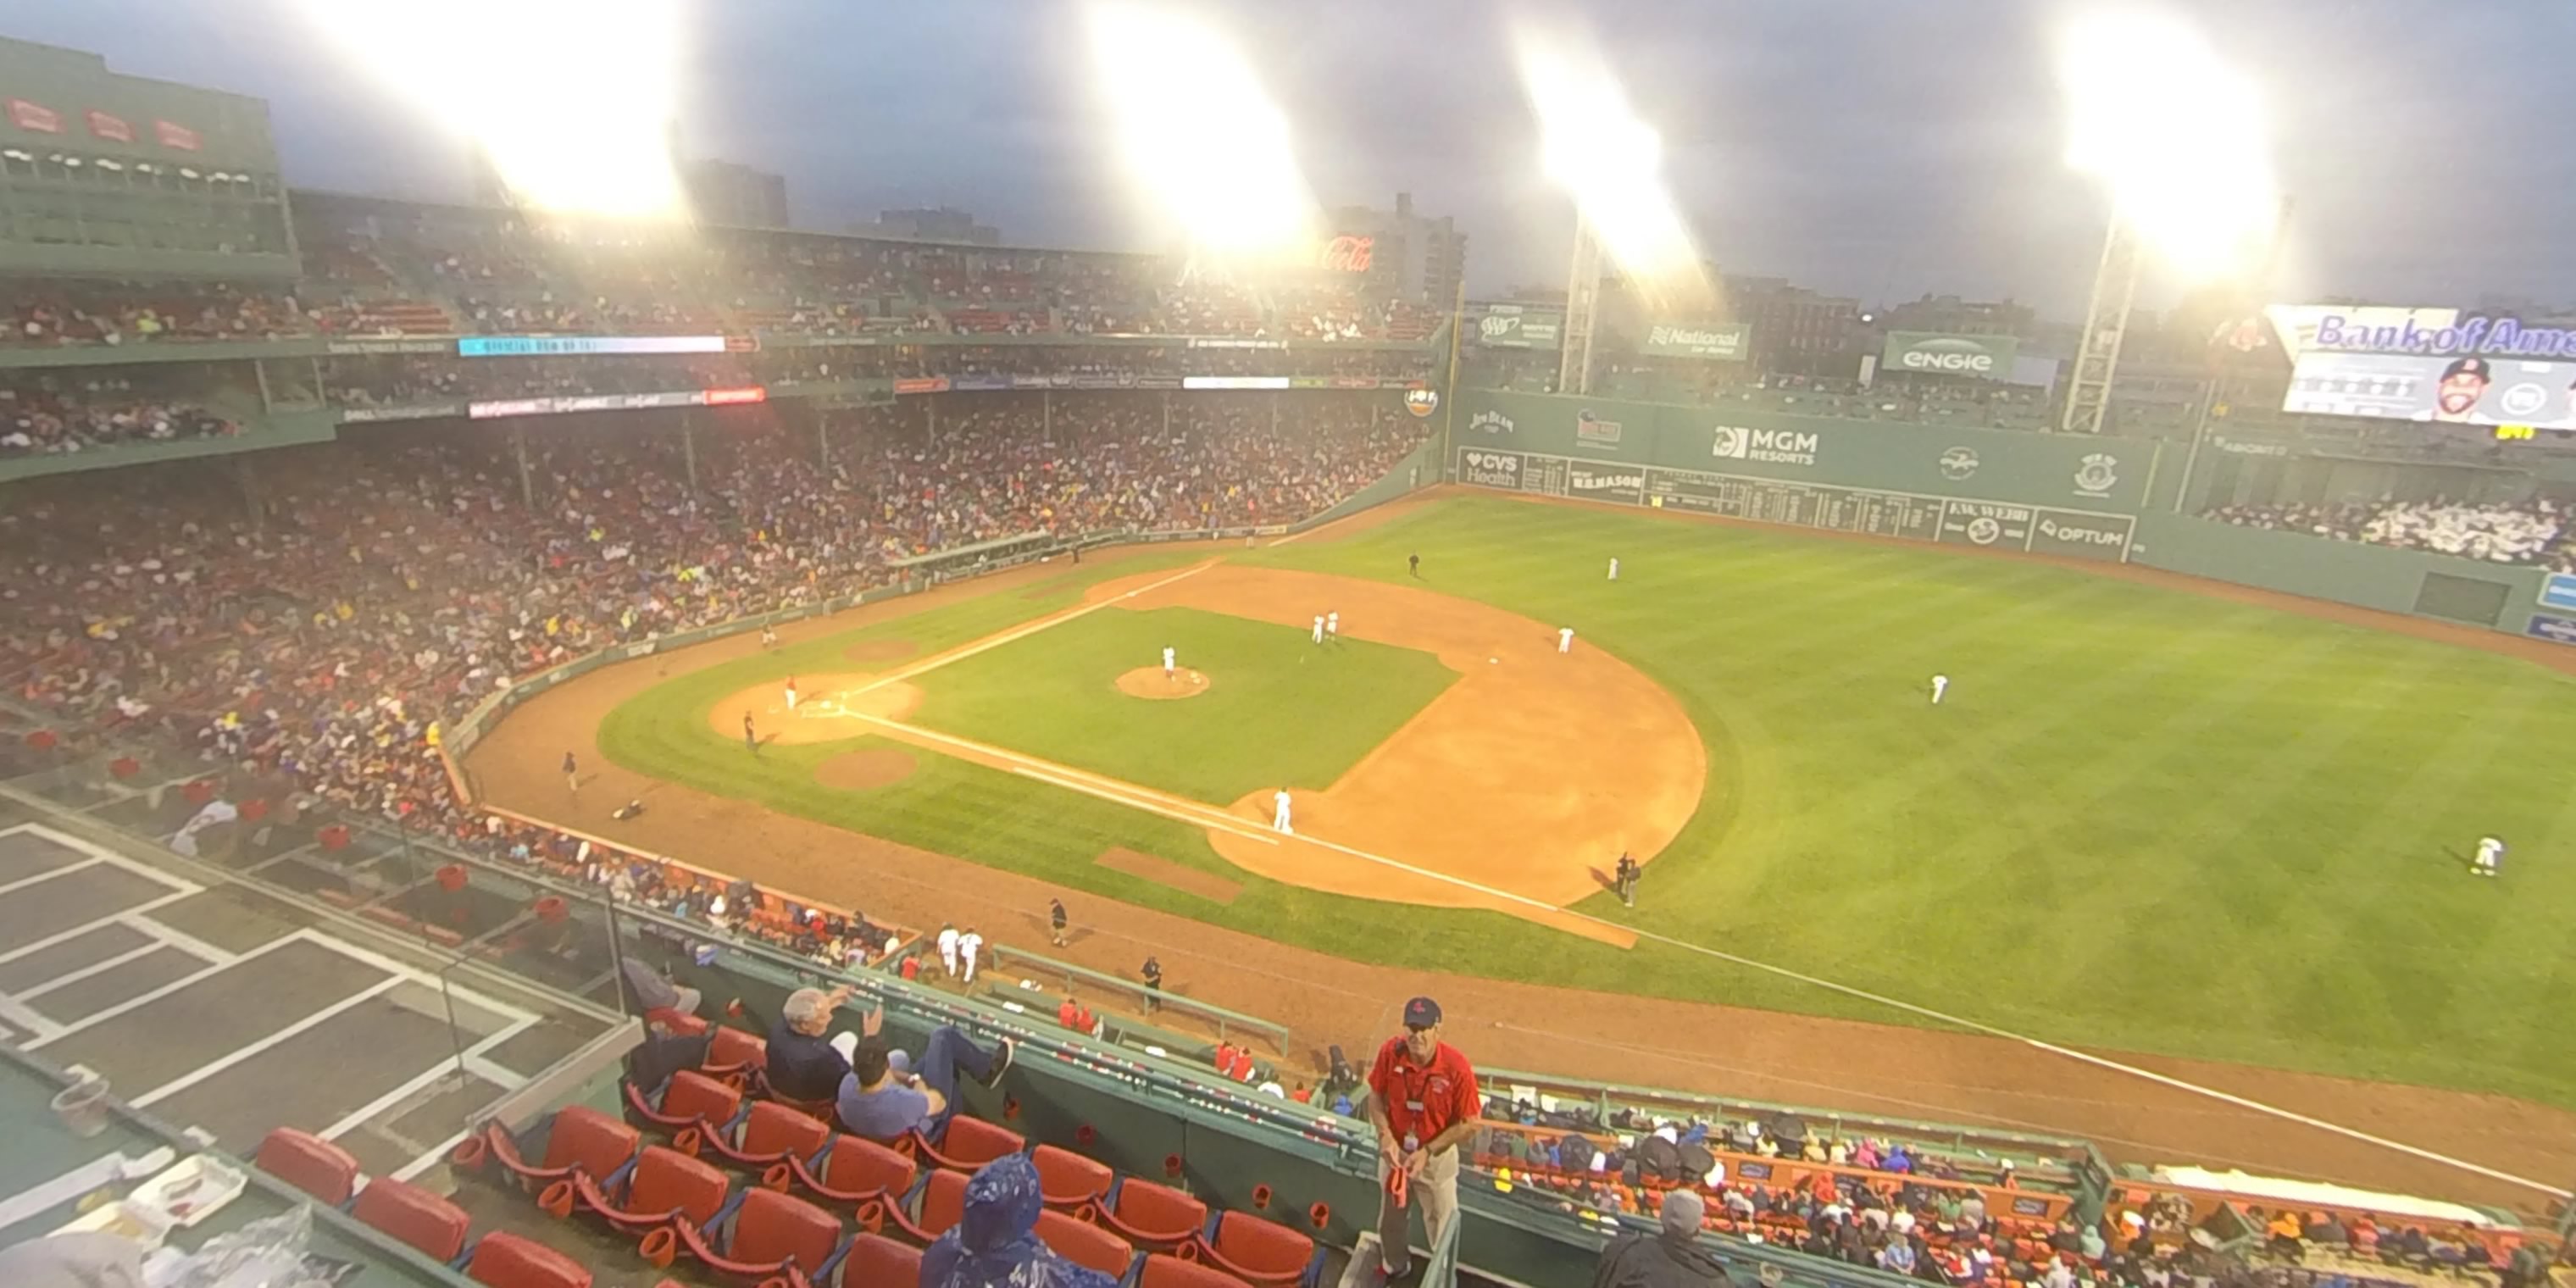 pavilion box 11 panoramic seat view  for baseball - fenway park